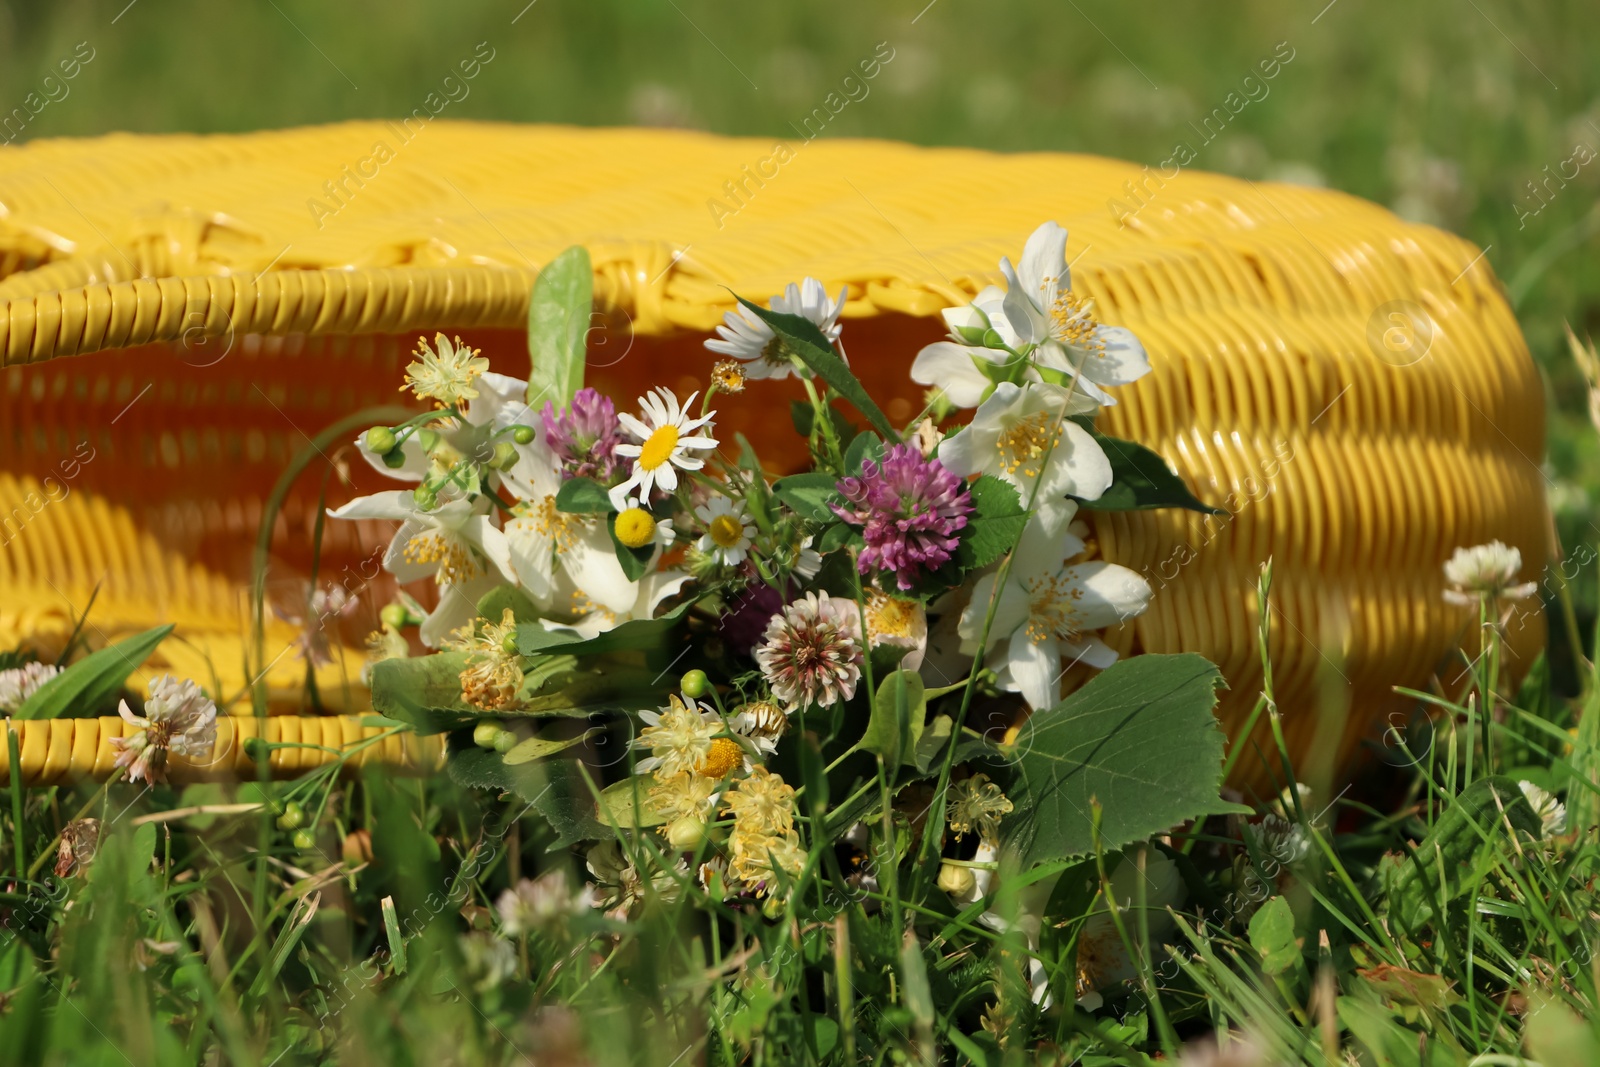 Photo of Yellow wicker bag with different wildflowers and herbs in meadow on sunny day, closeup